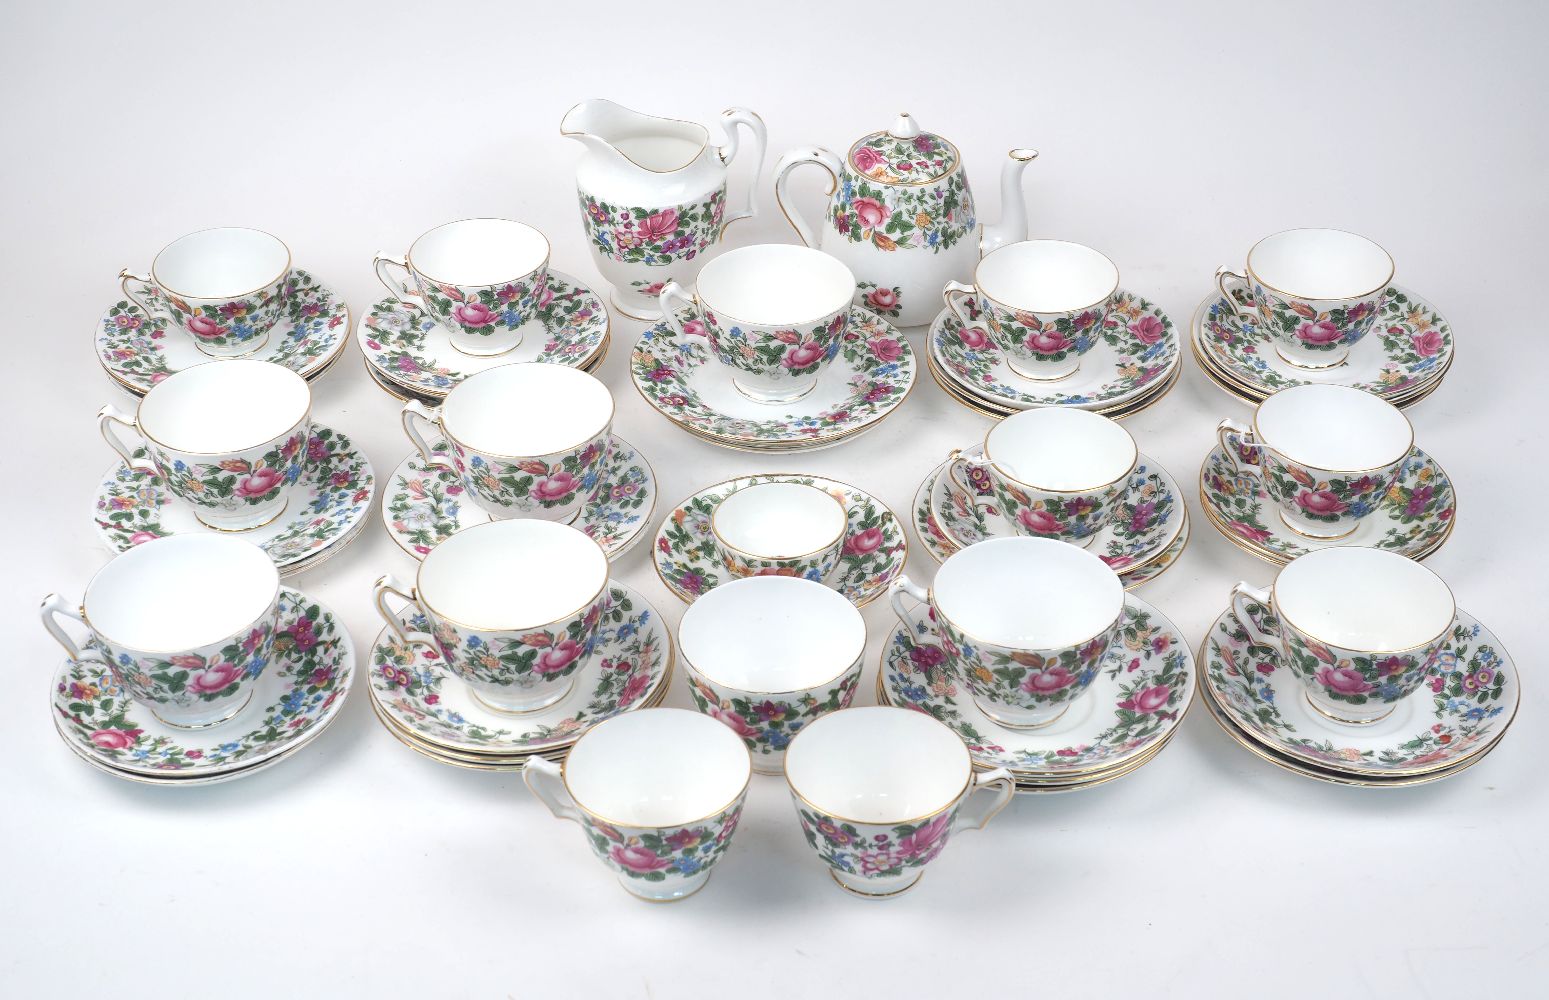 A quantity of Crown Staffordshire tea set pieces, early 20th century, decorated with a floral